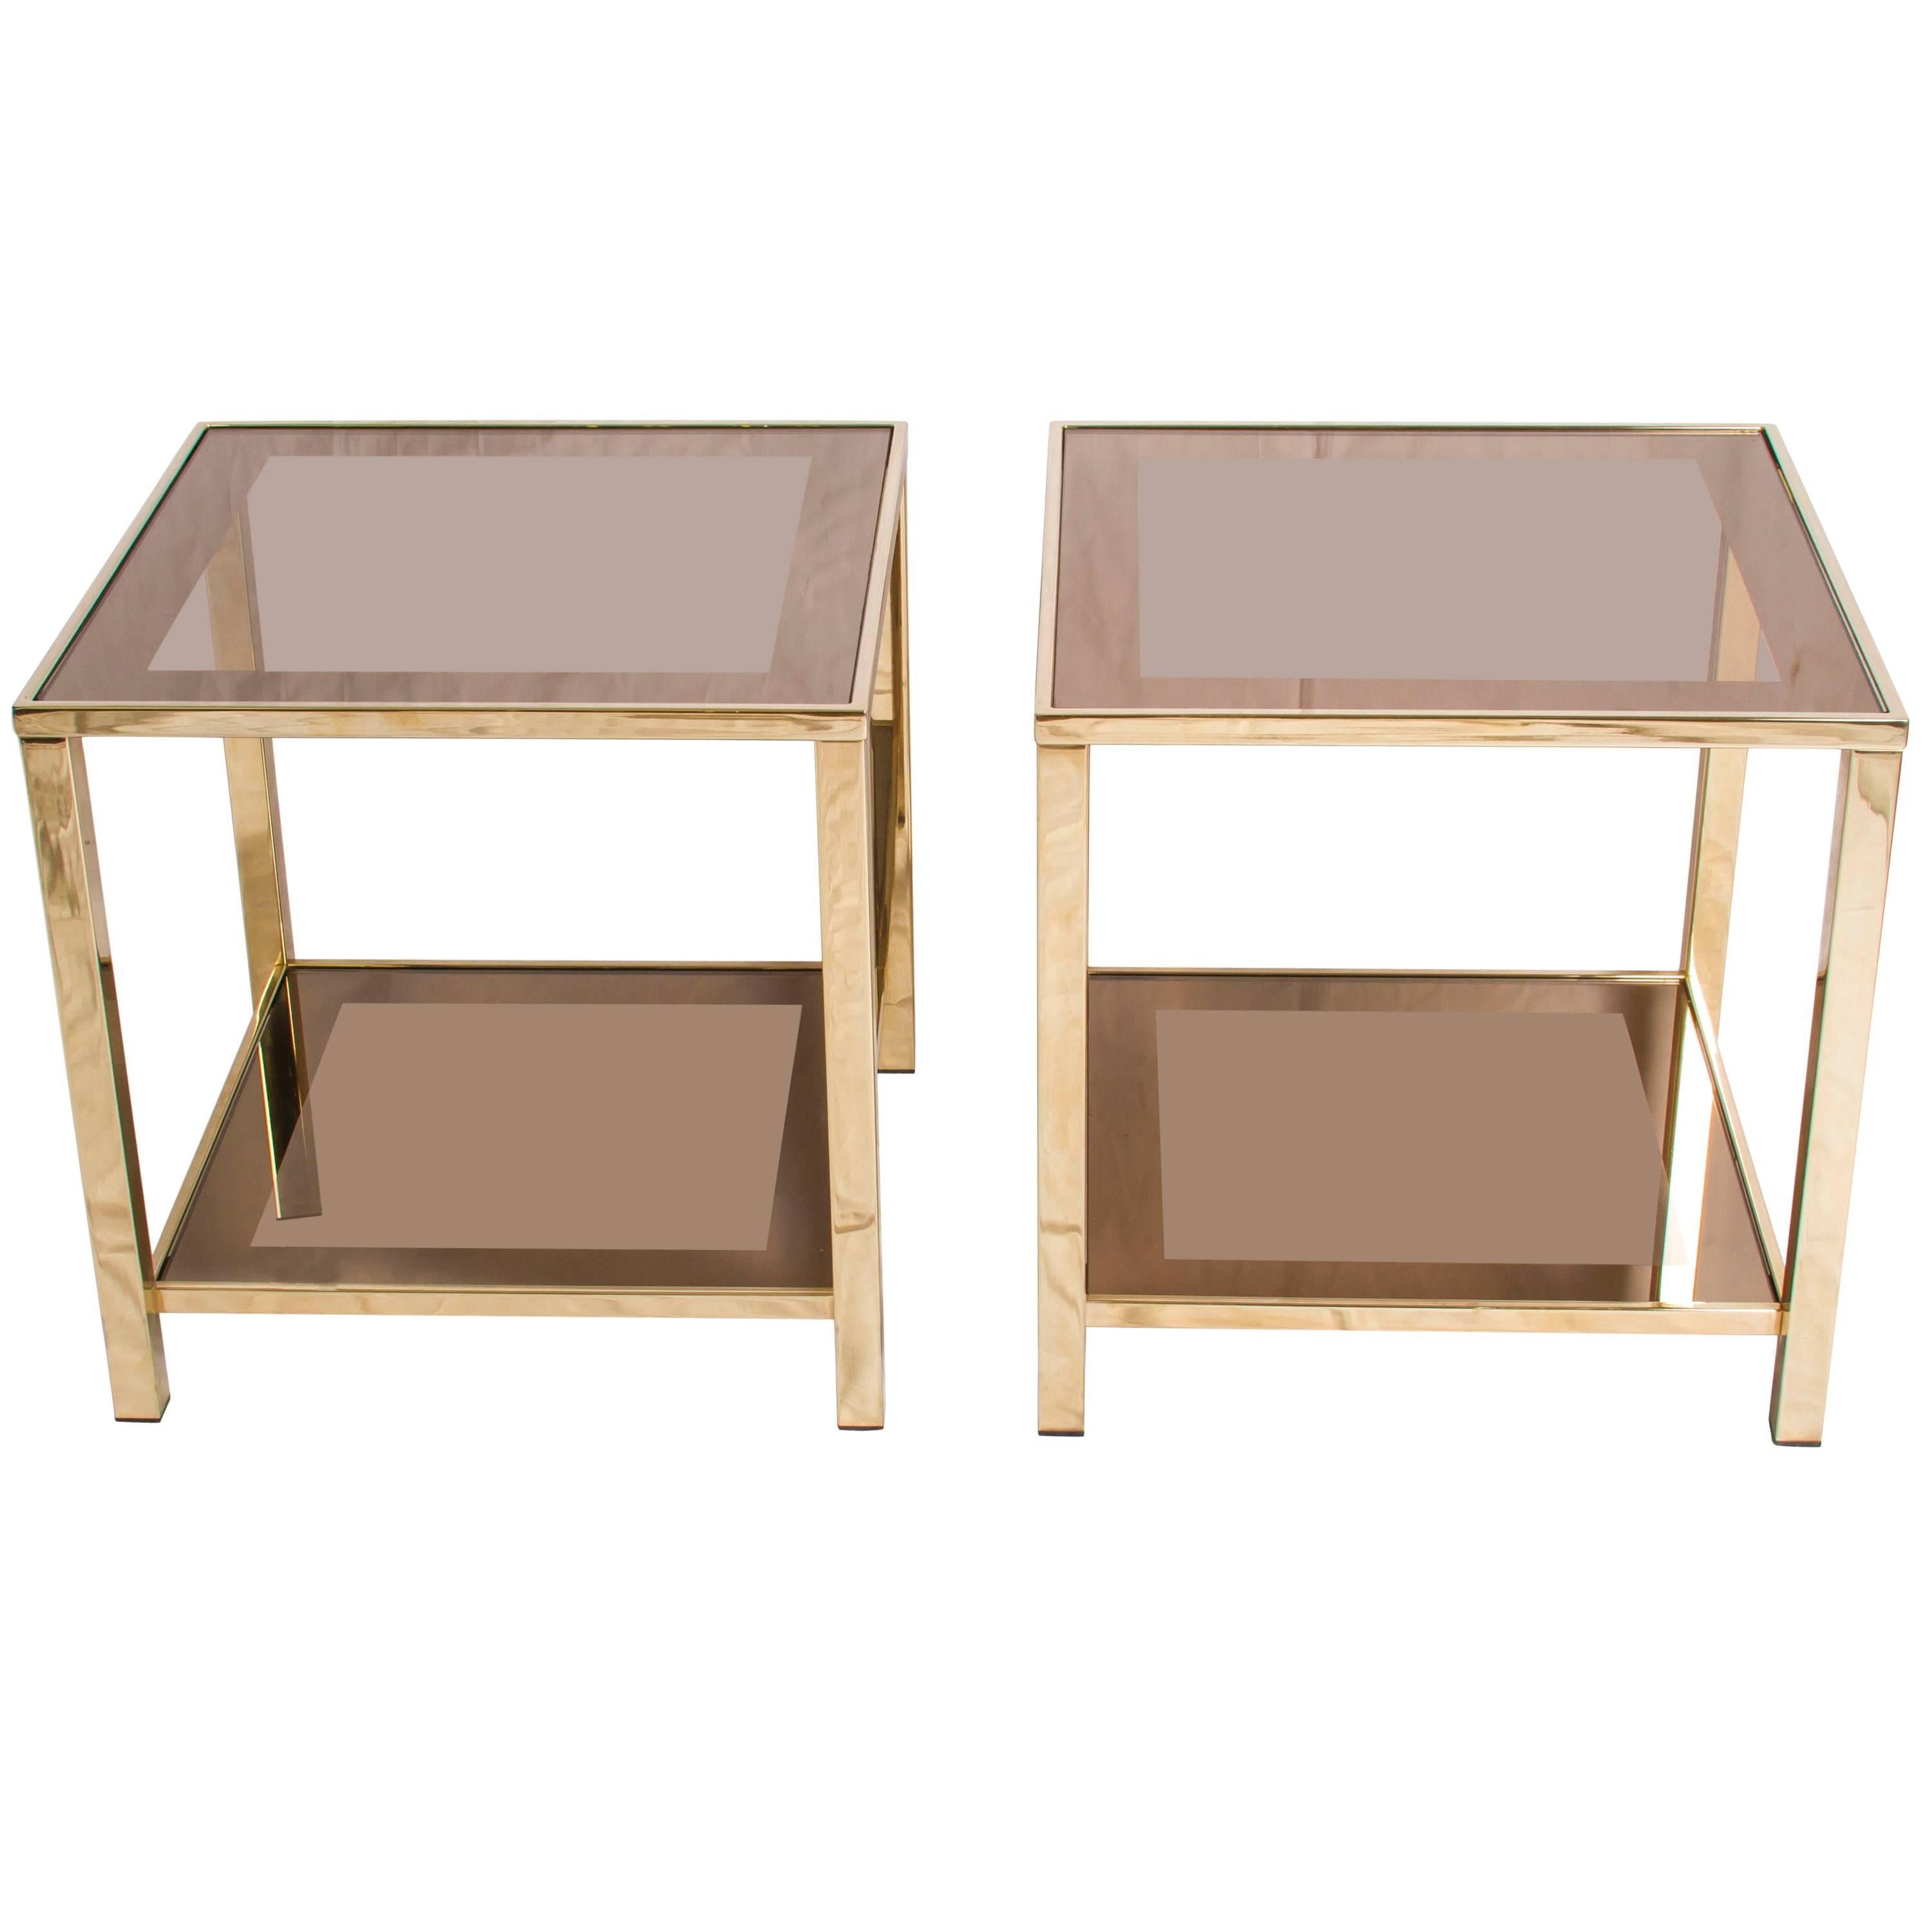 Pair of Two 23-Carat Gold-Plated Side Tables by Belgo Chrome